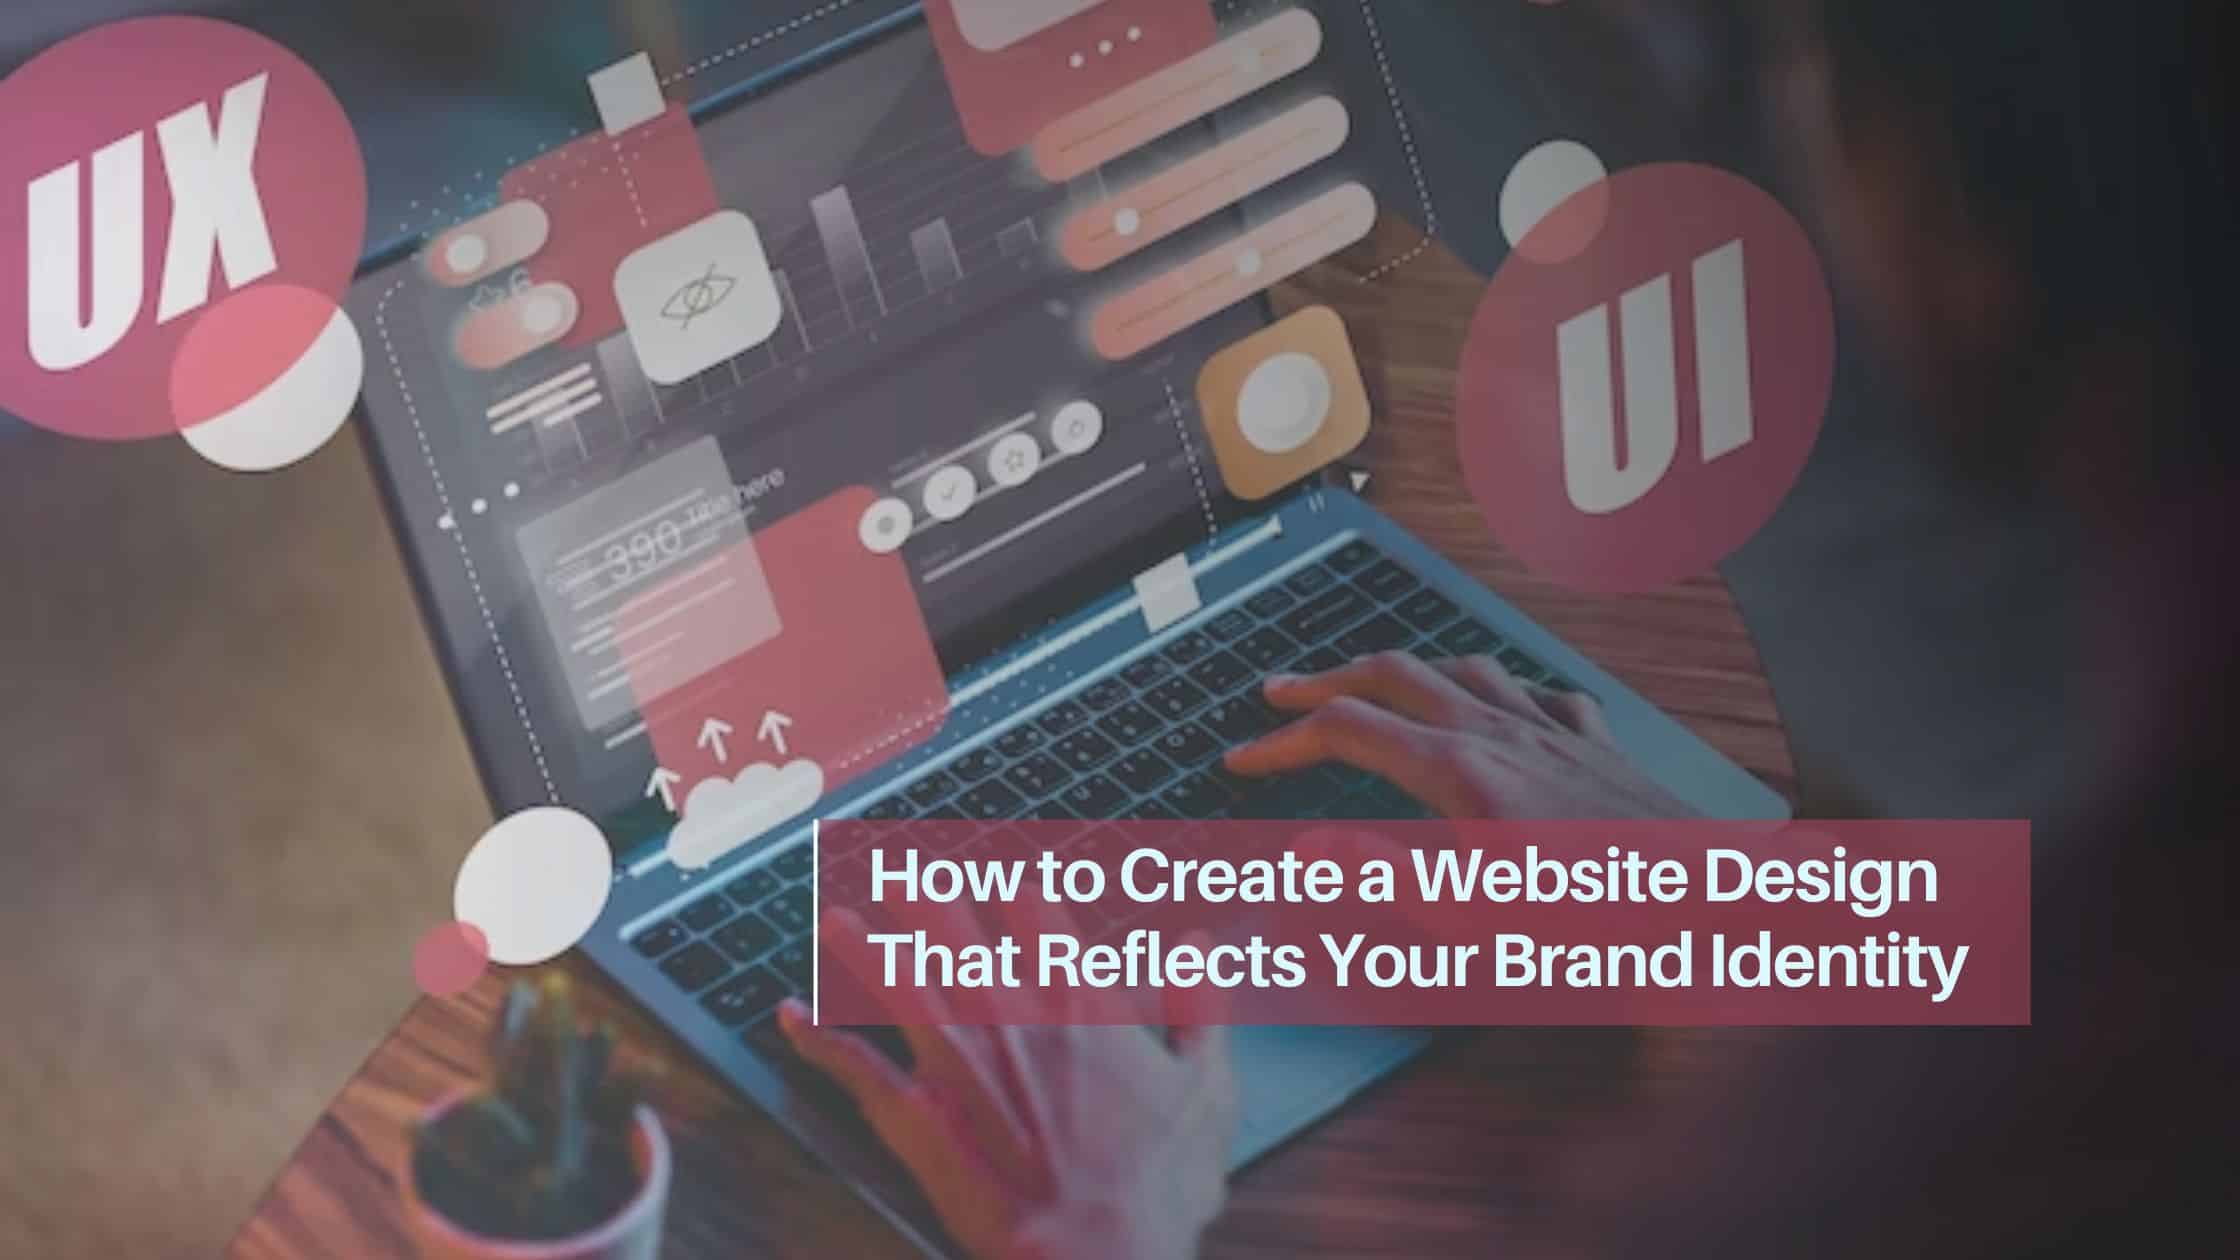 How to Create a Website Design That Reflects Your Brand Identity